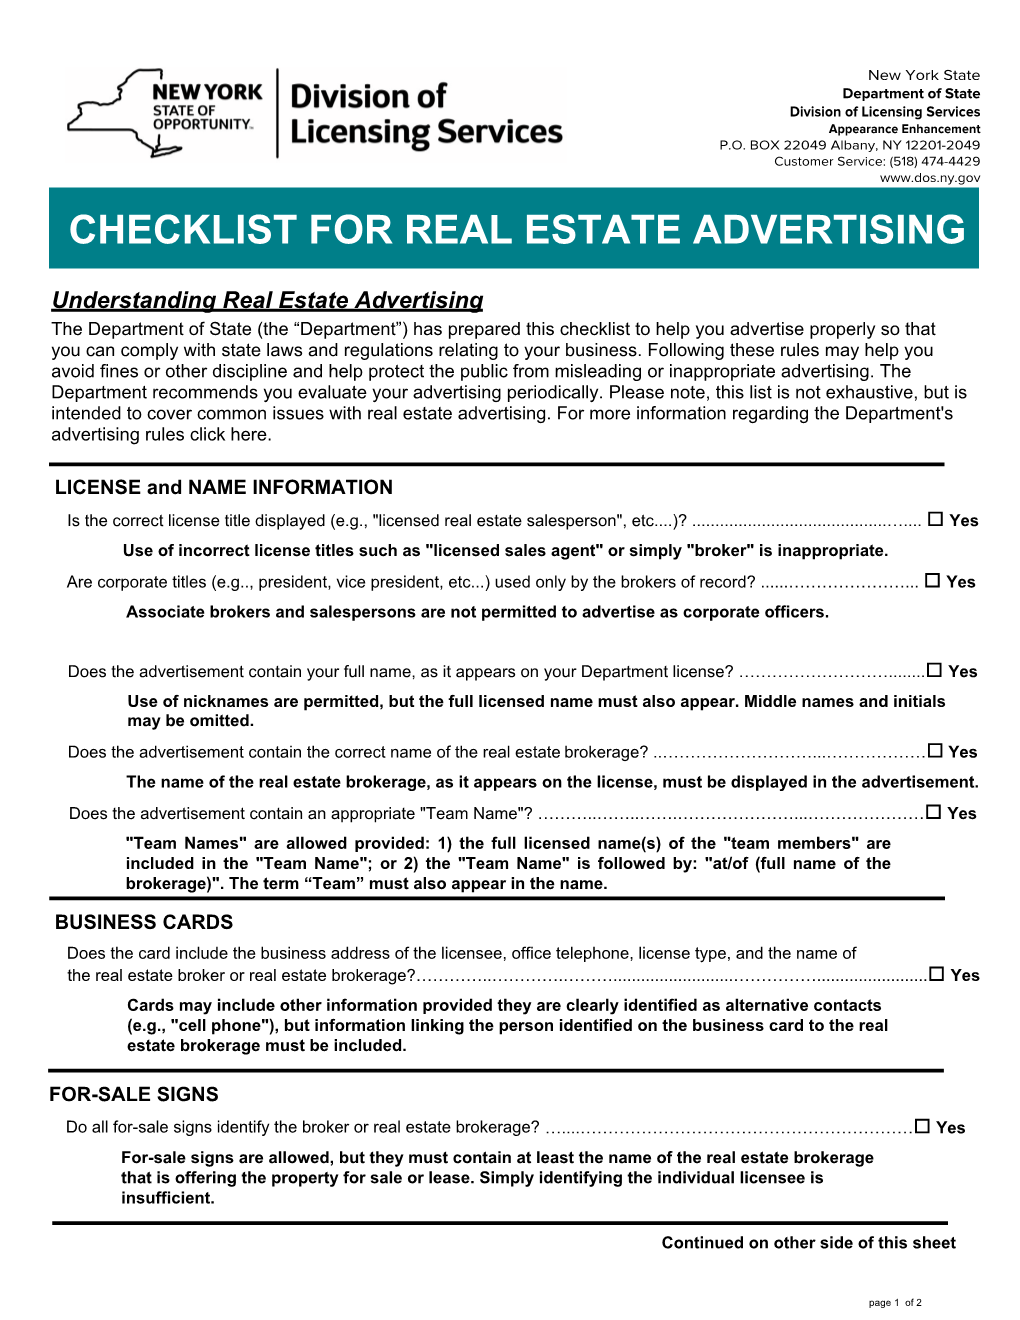 Checklist for Real Estate Advertising